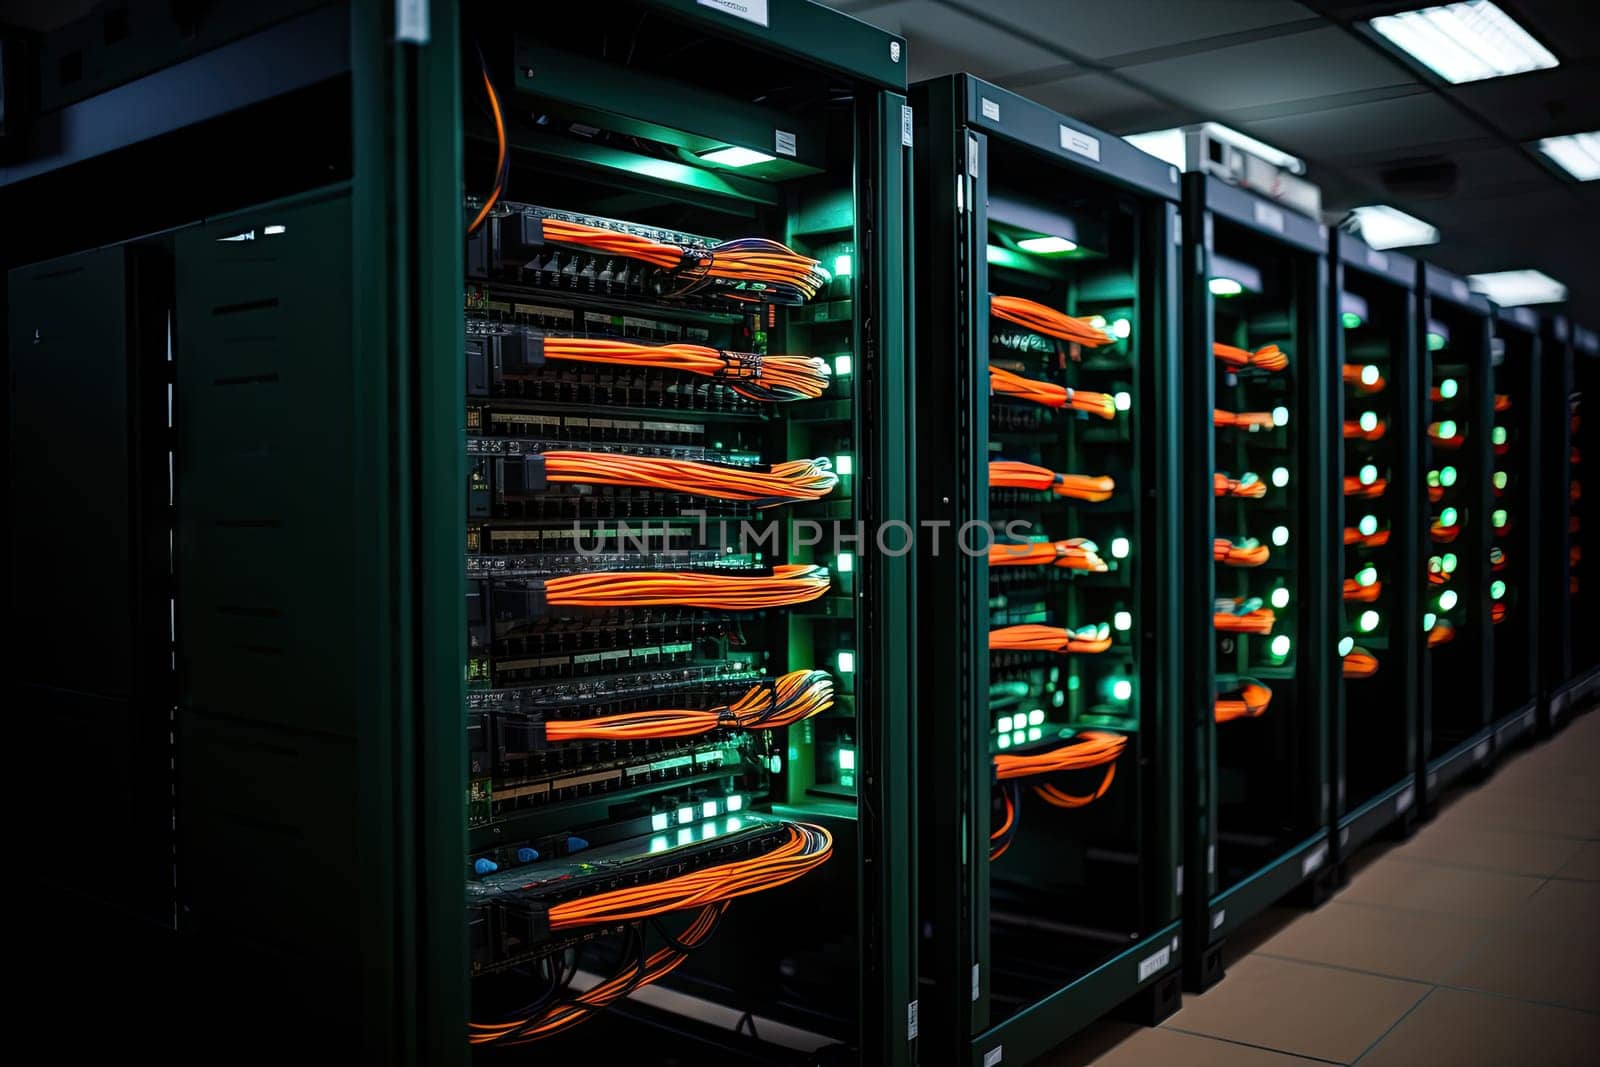 A row of servers in a data center by golibtolibov